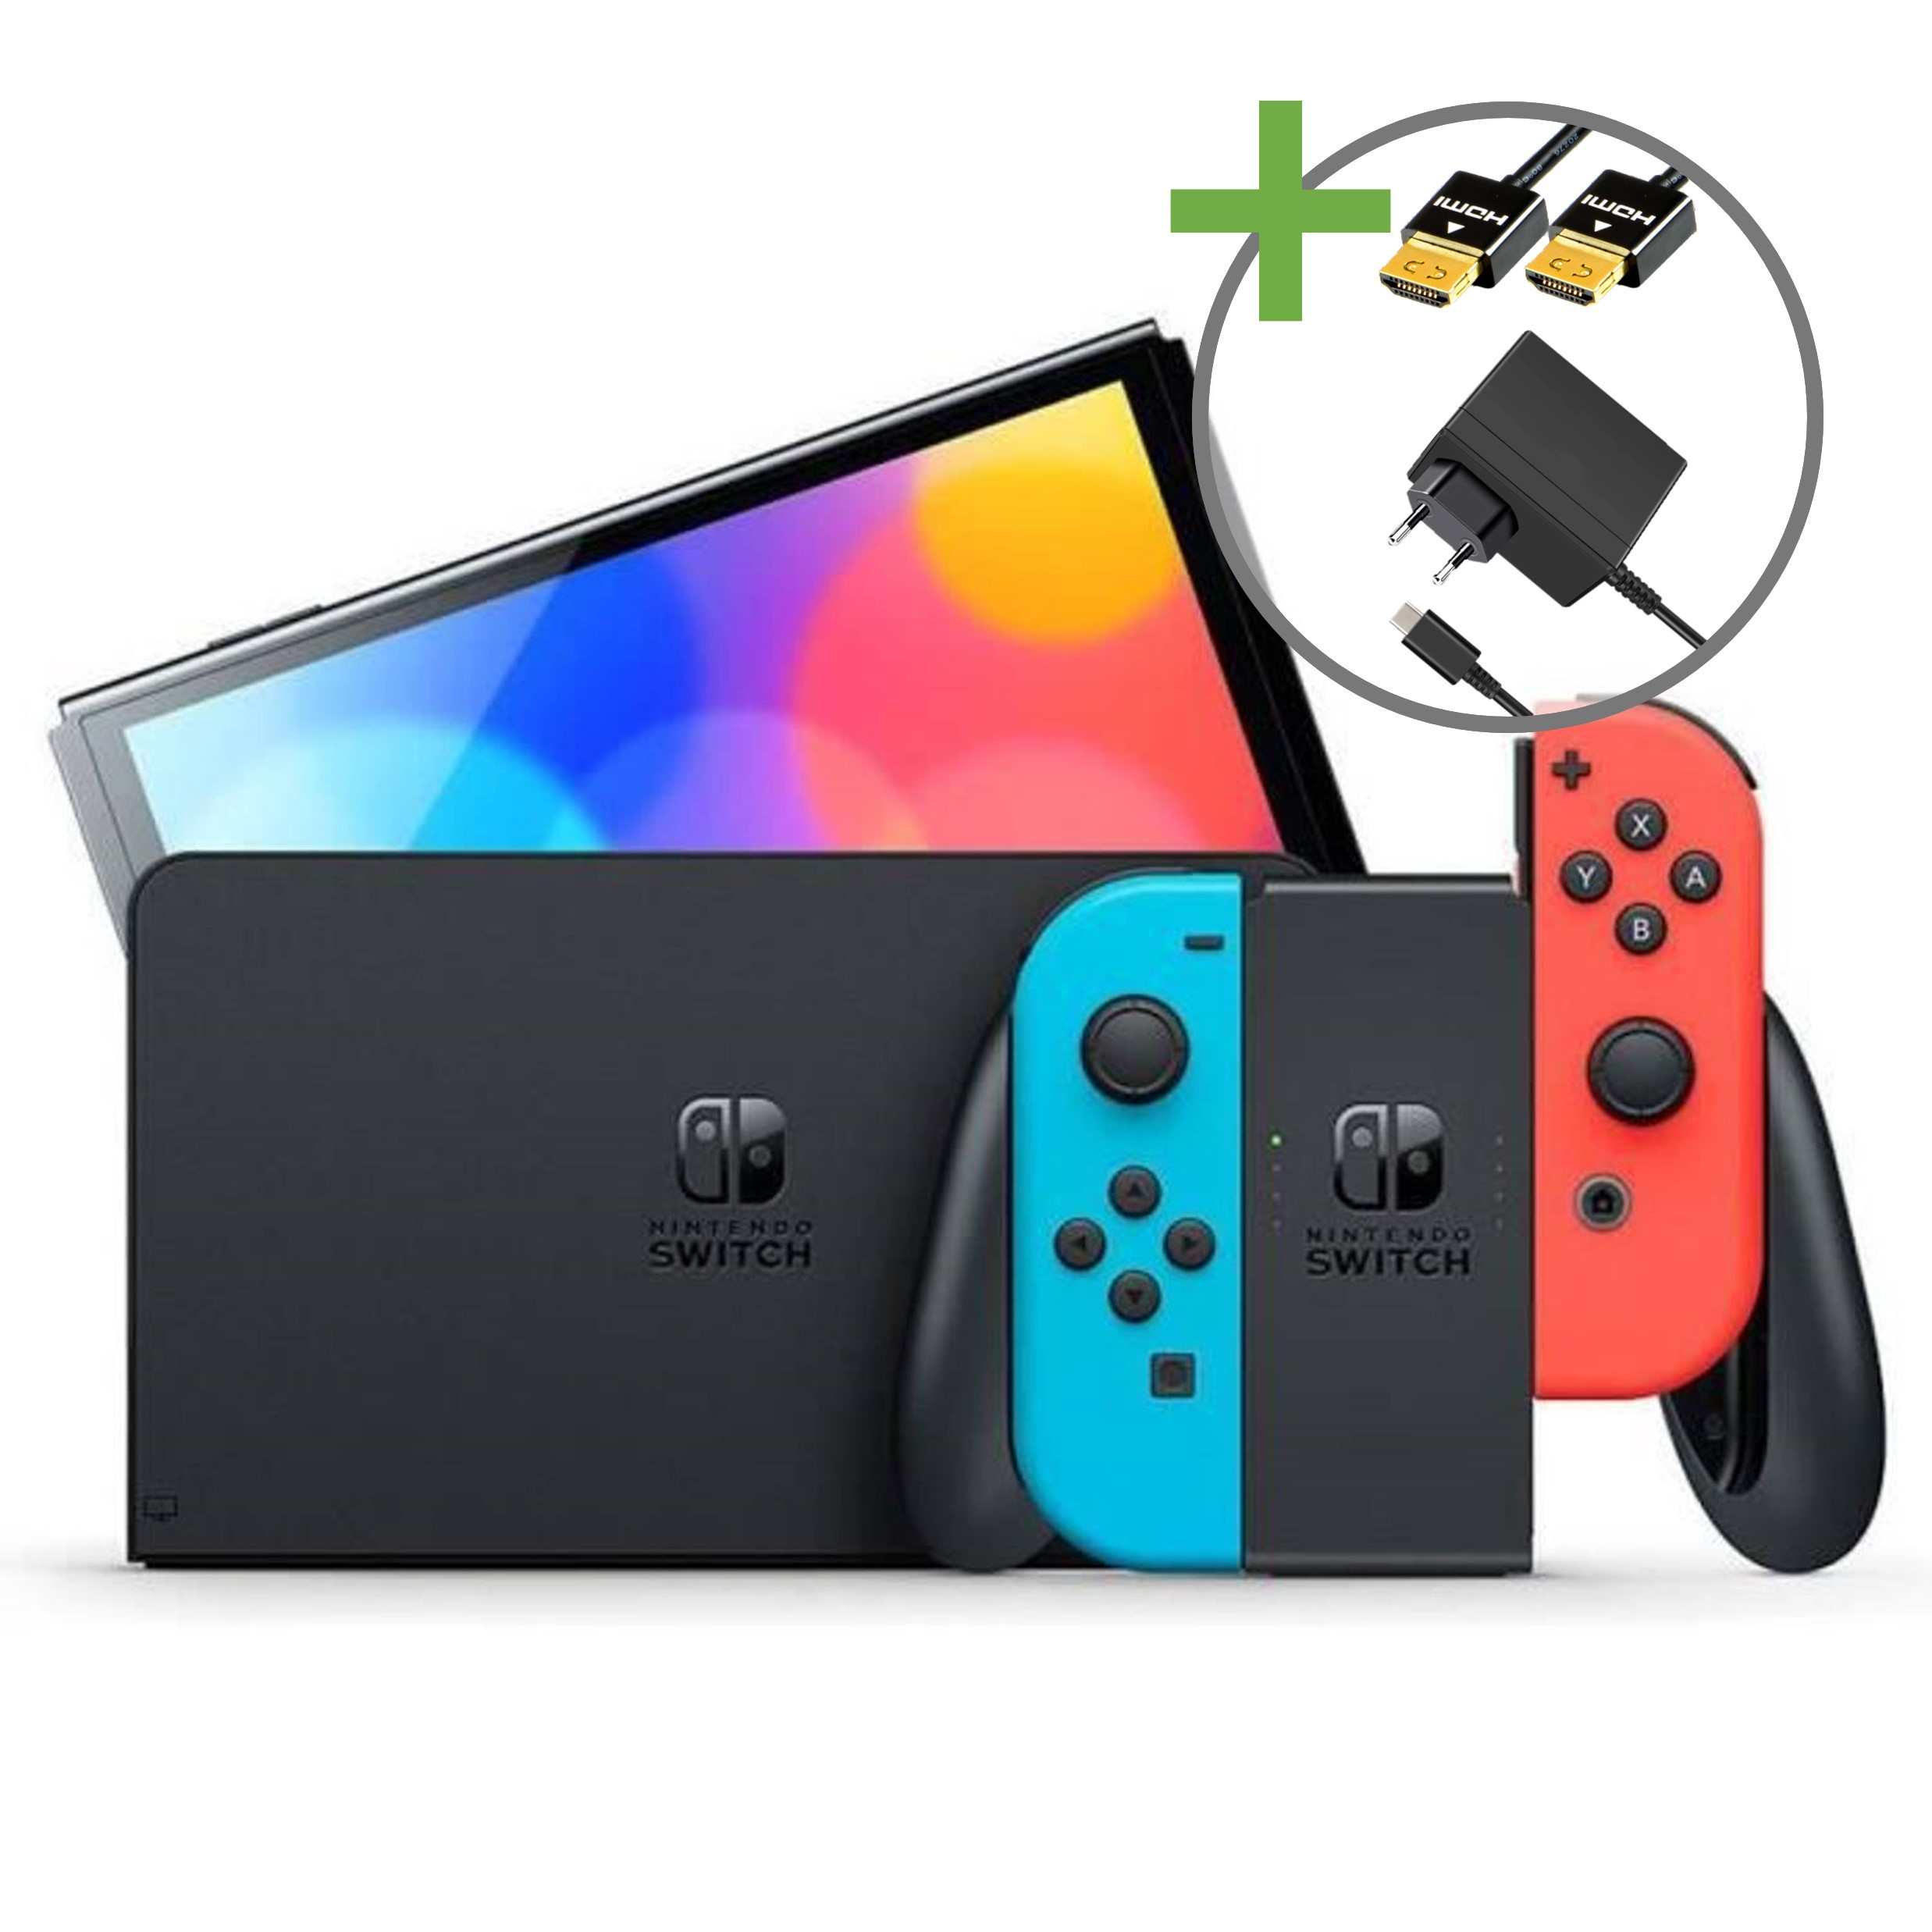 Nintendo Switch Console OLED Starter Pack - Red/Blue - Nintendo Switch Hardware